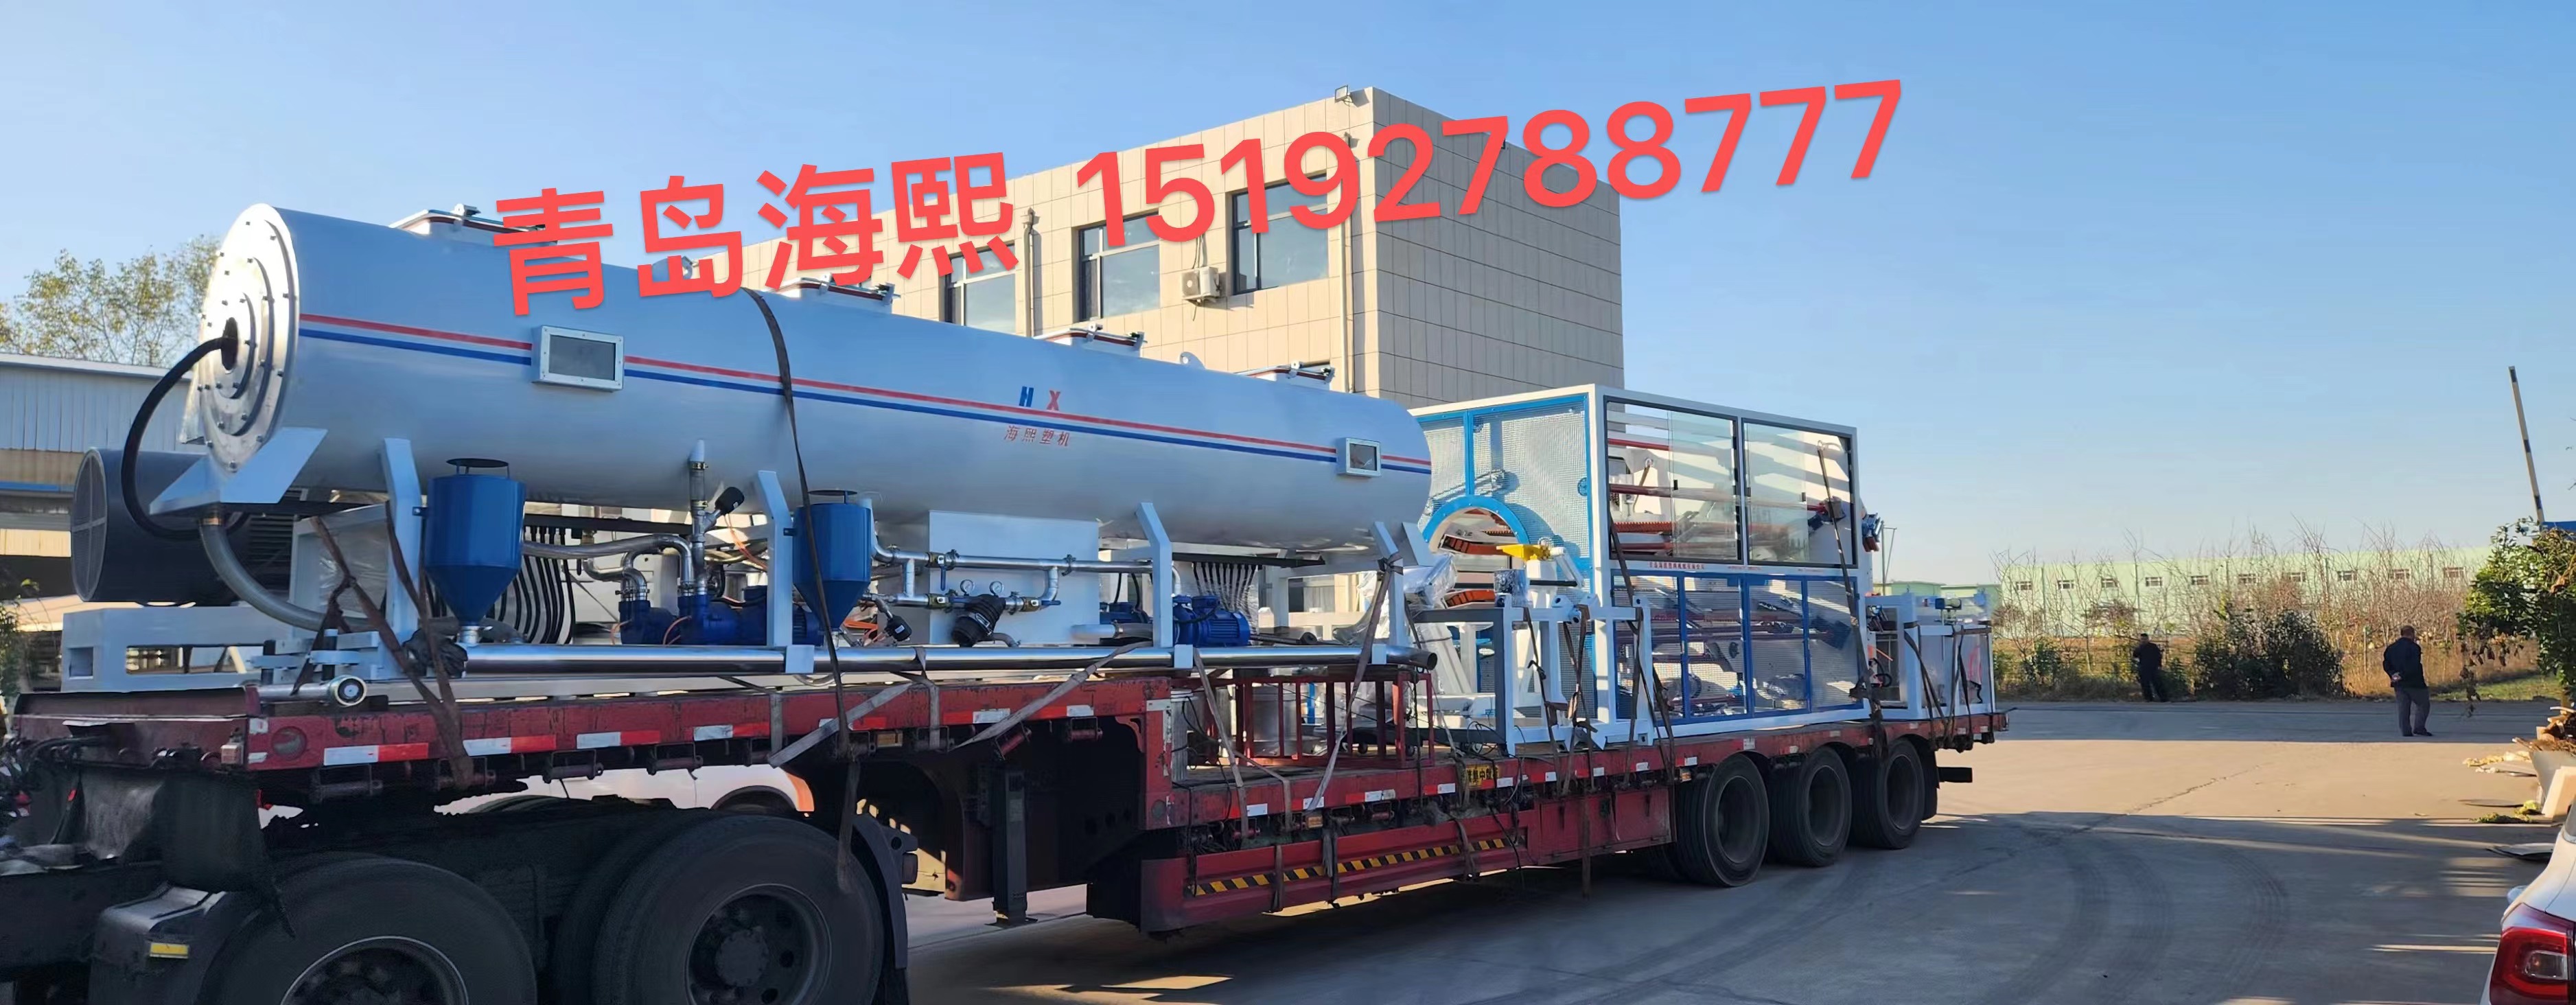 Shanxi Hengchuang pipe industry technology Co., LT